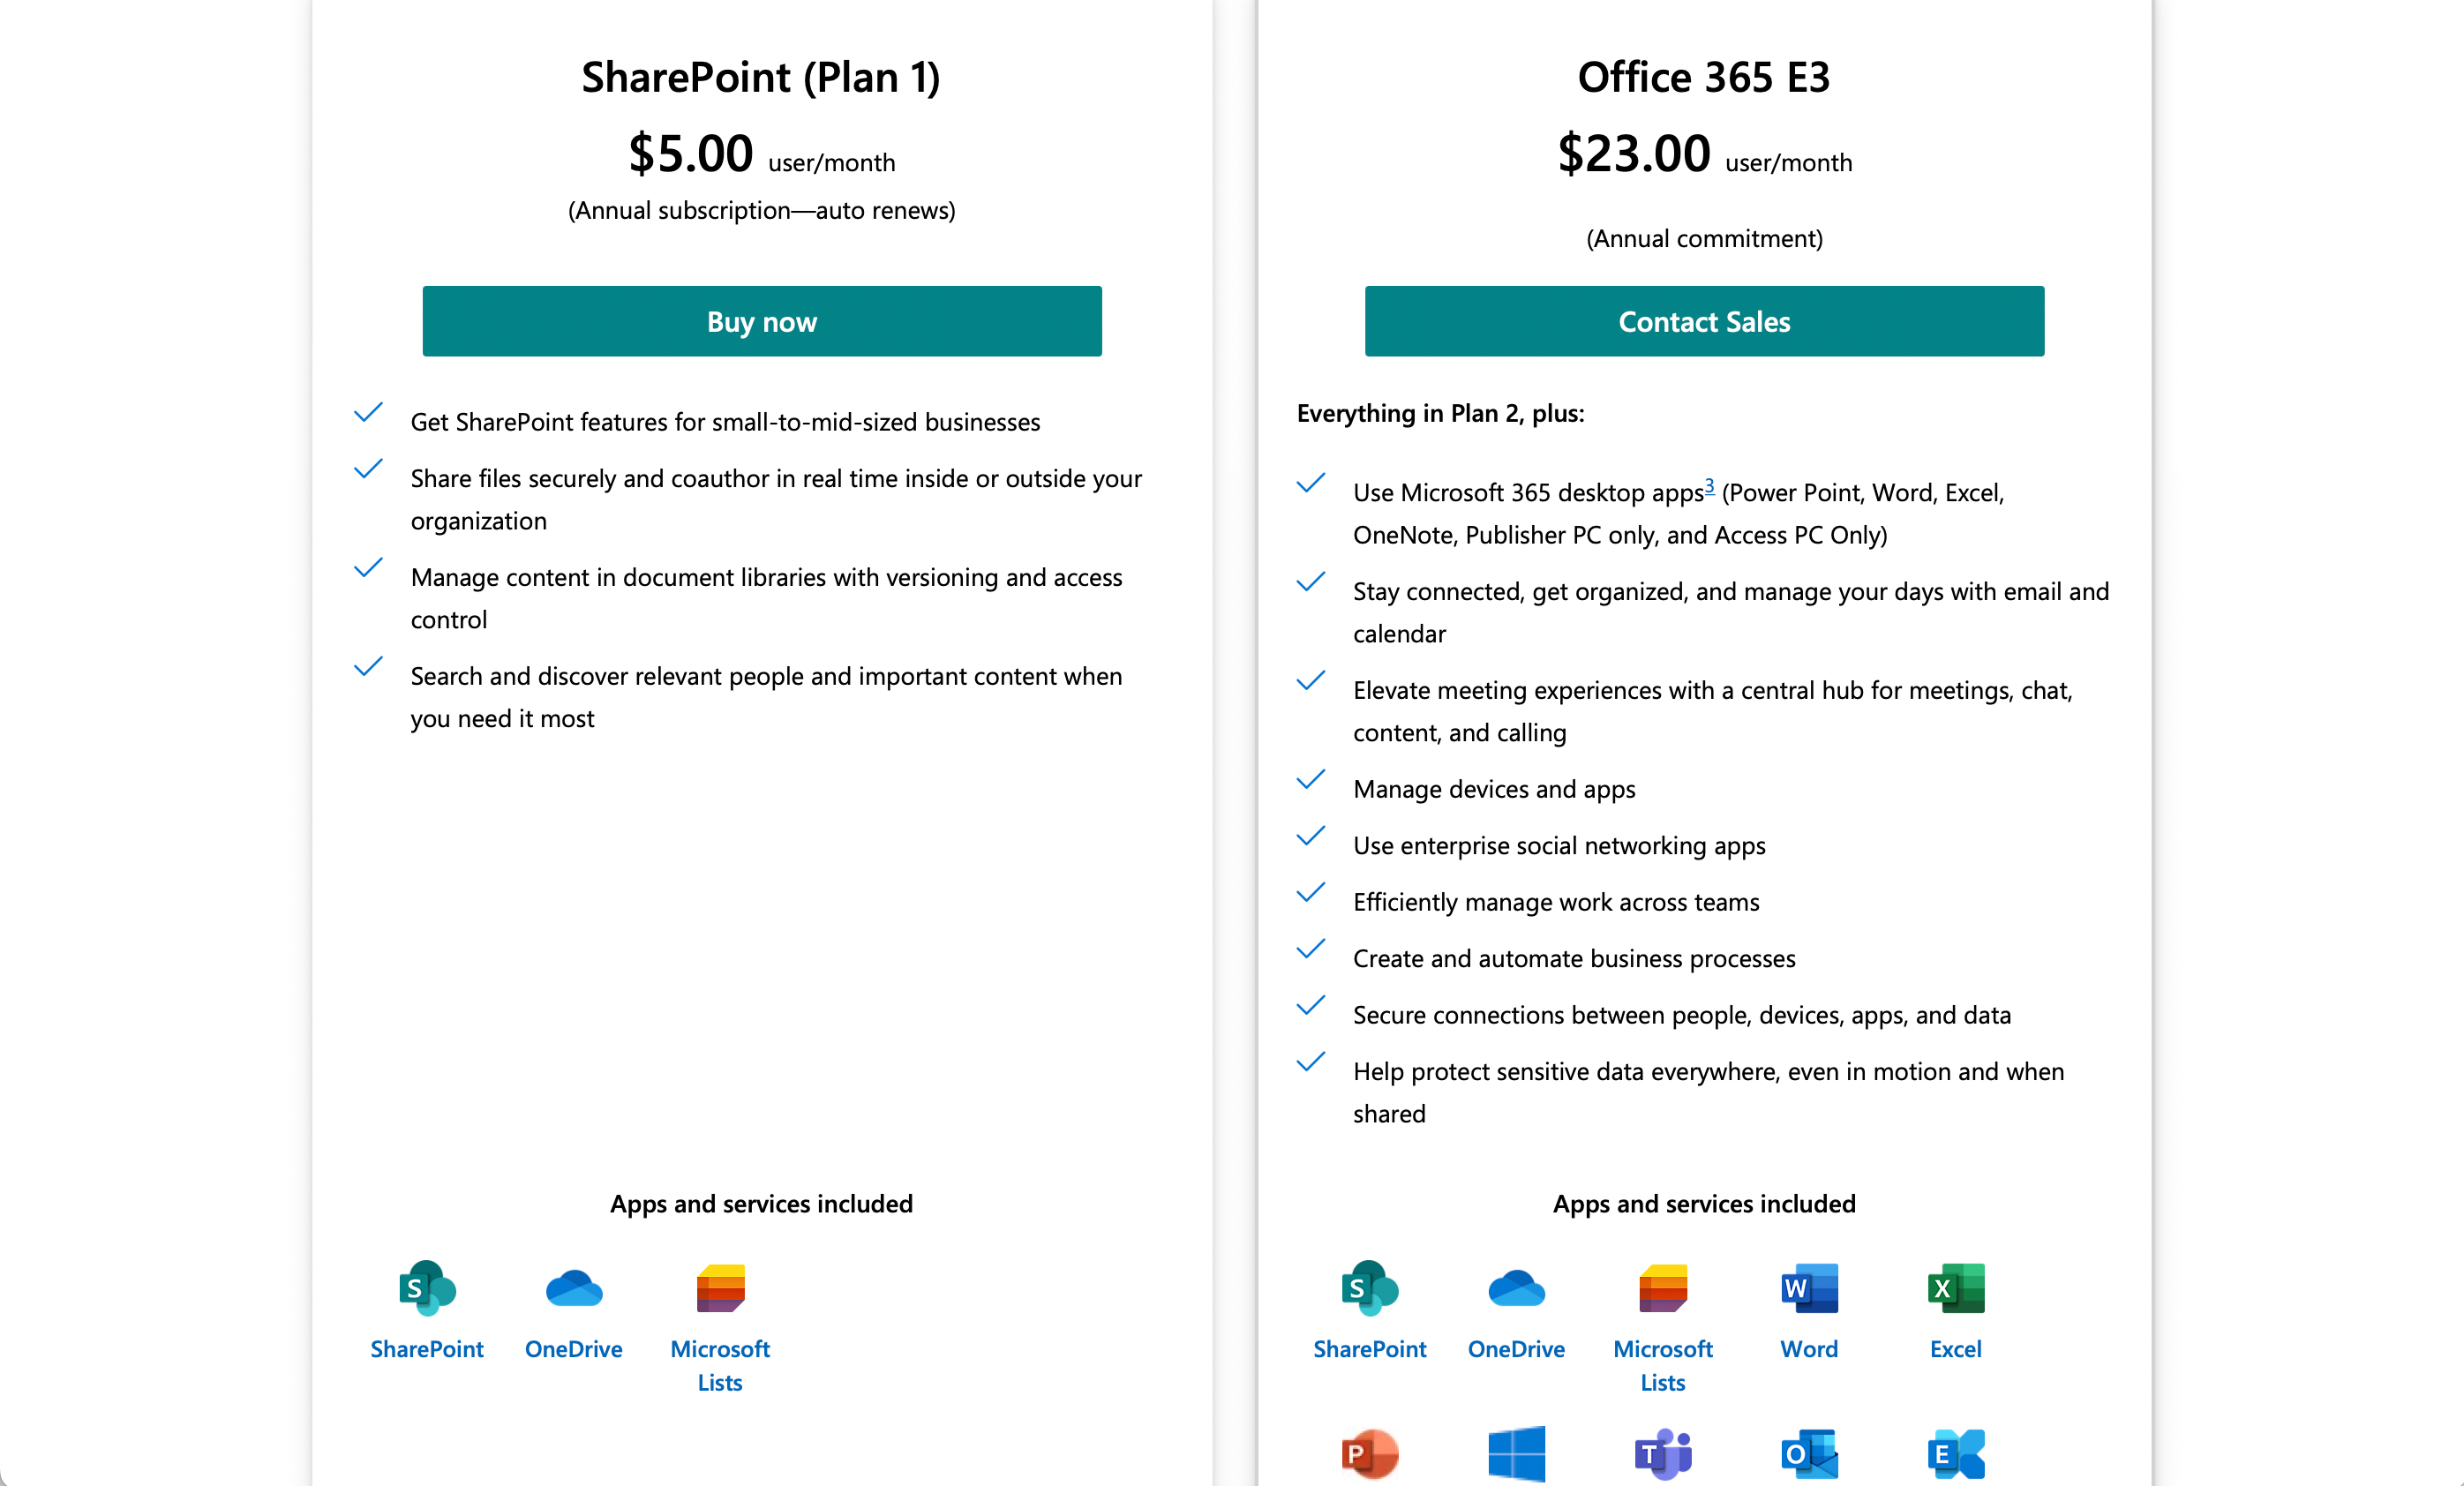 Pricing for SharePoint from microsoft website